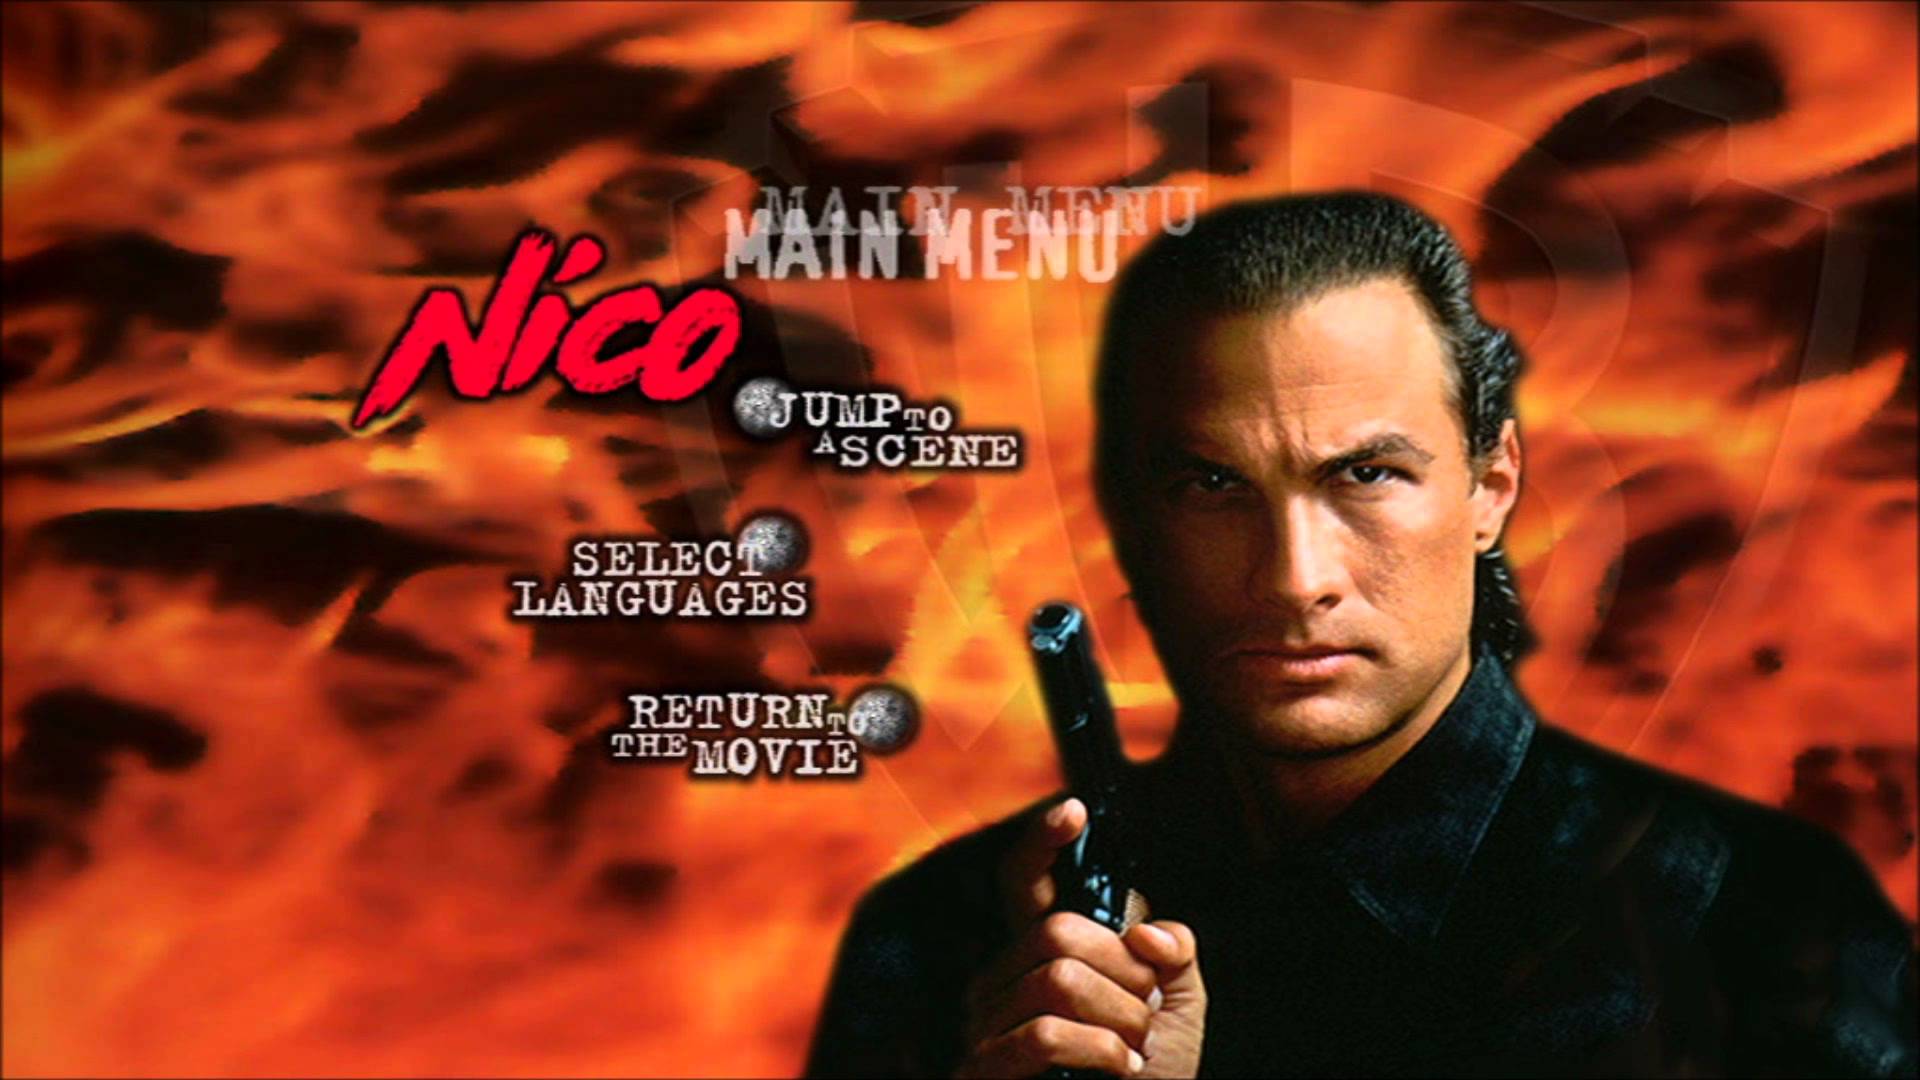 Amazing Above The Law Pictures & Backgrounds - Steven Seagal Nico Above The Law , HD Wallpaper & Backgrounds